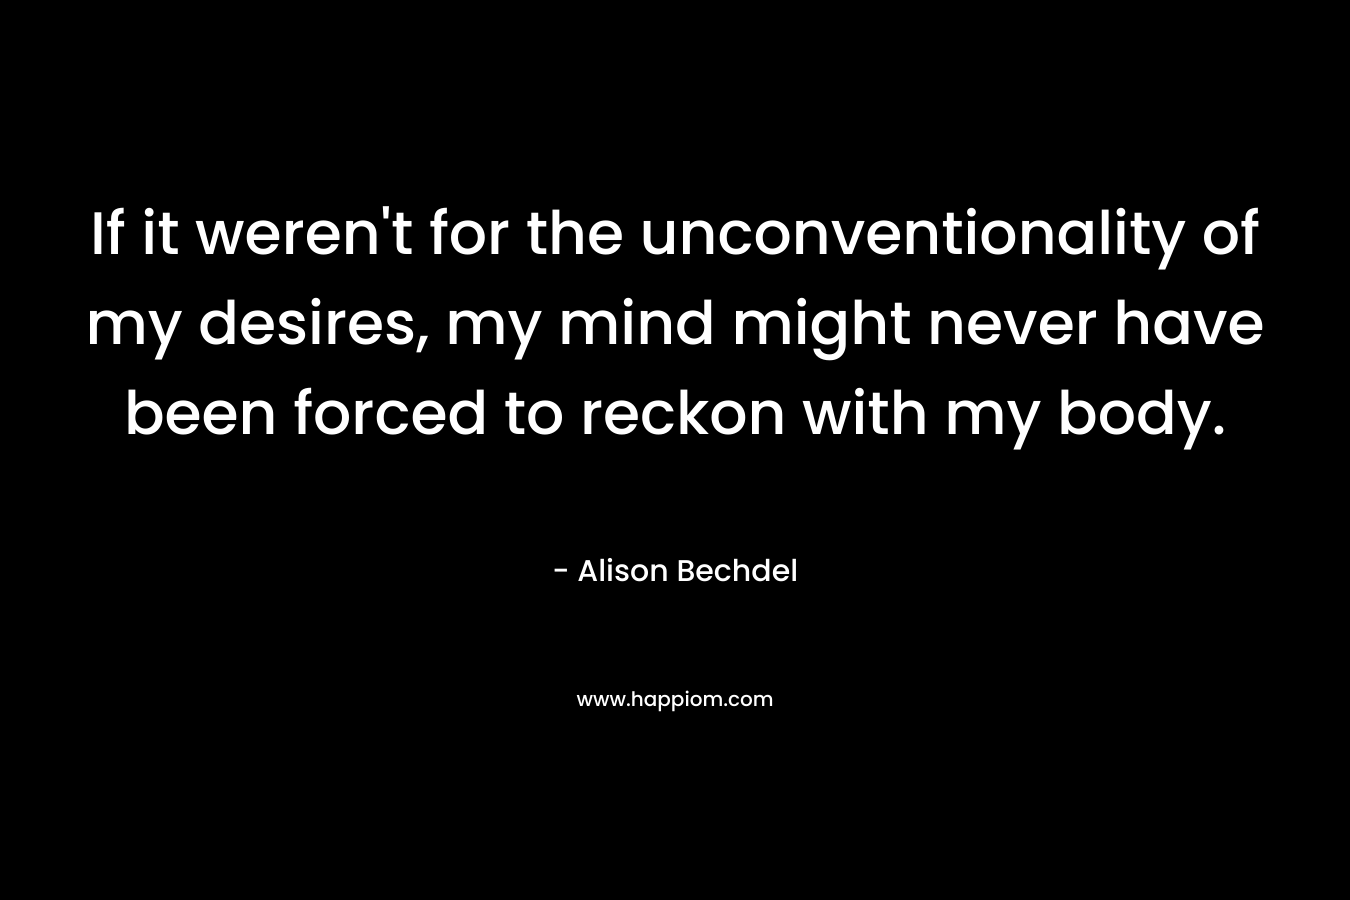 If it weren’t for the unconventionality of my desires, my mind might never have been forced to reckon with my body. – Alison Bechdel